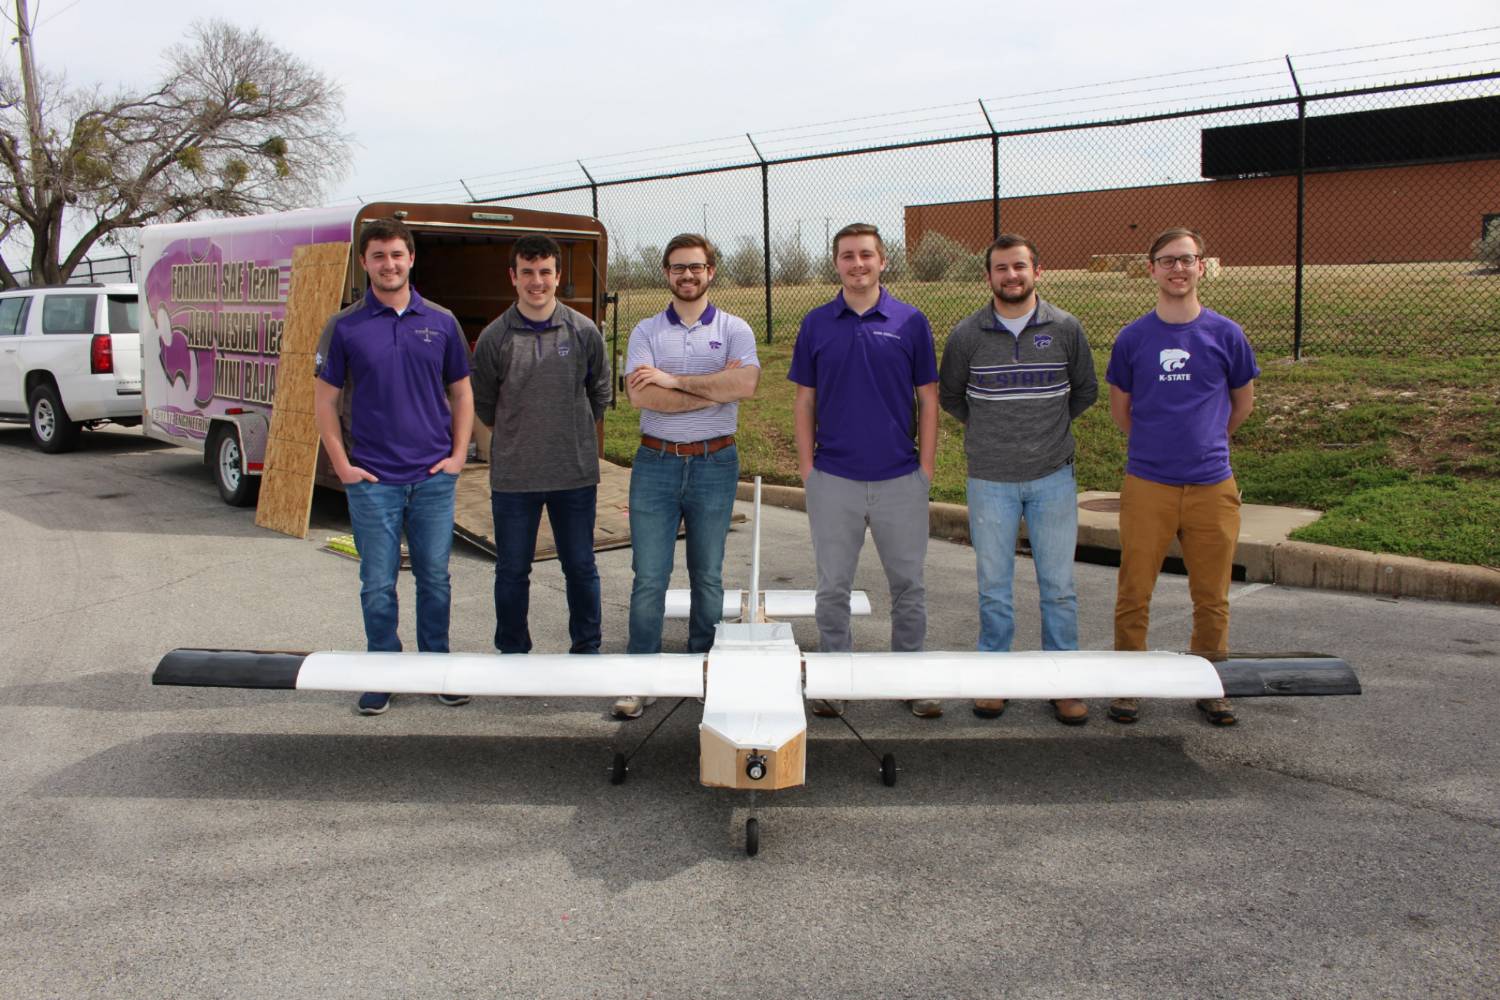 2019 East Competition Team members with the aircraft